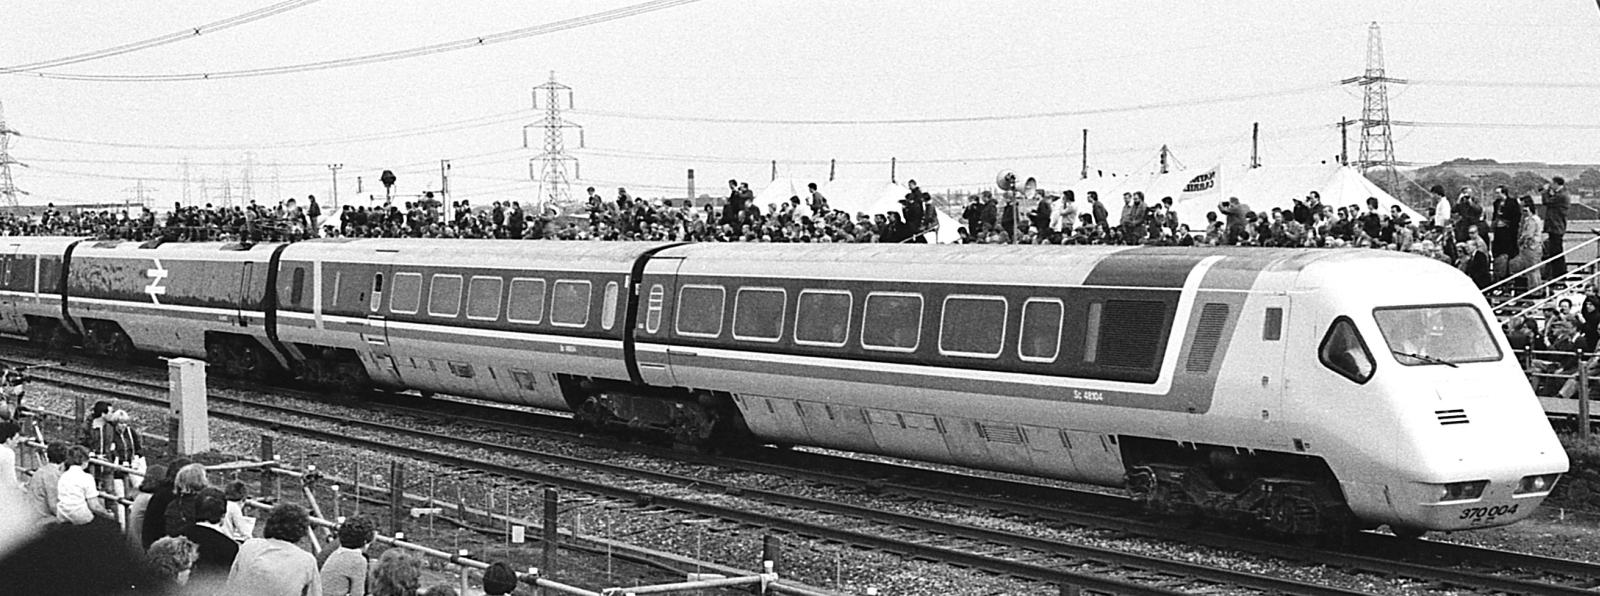 Shortened 370 004 with only one power car being pushed through crowds at Rainhill in May 1980